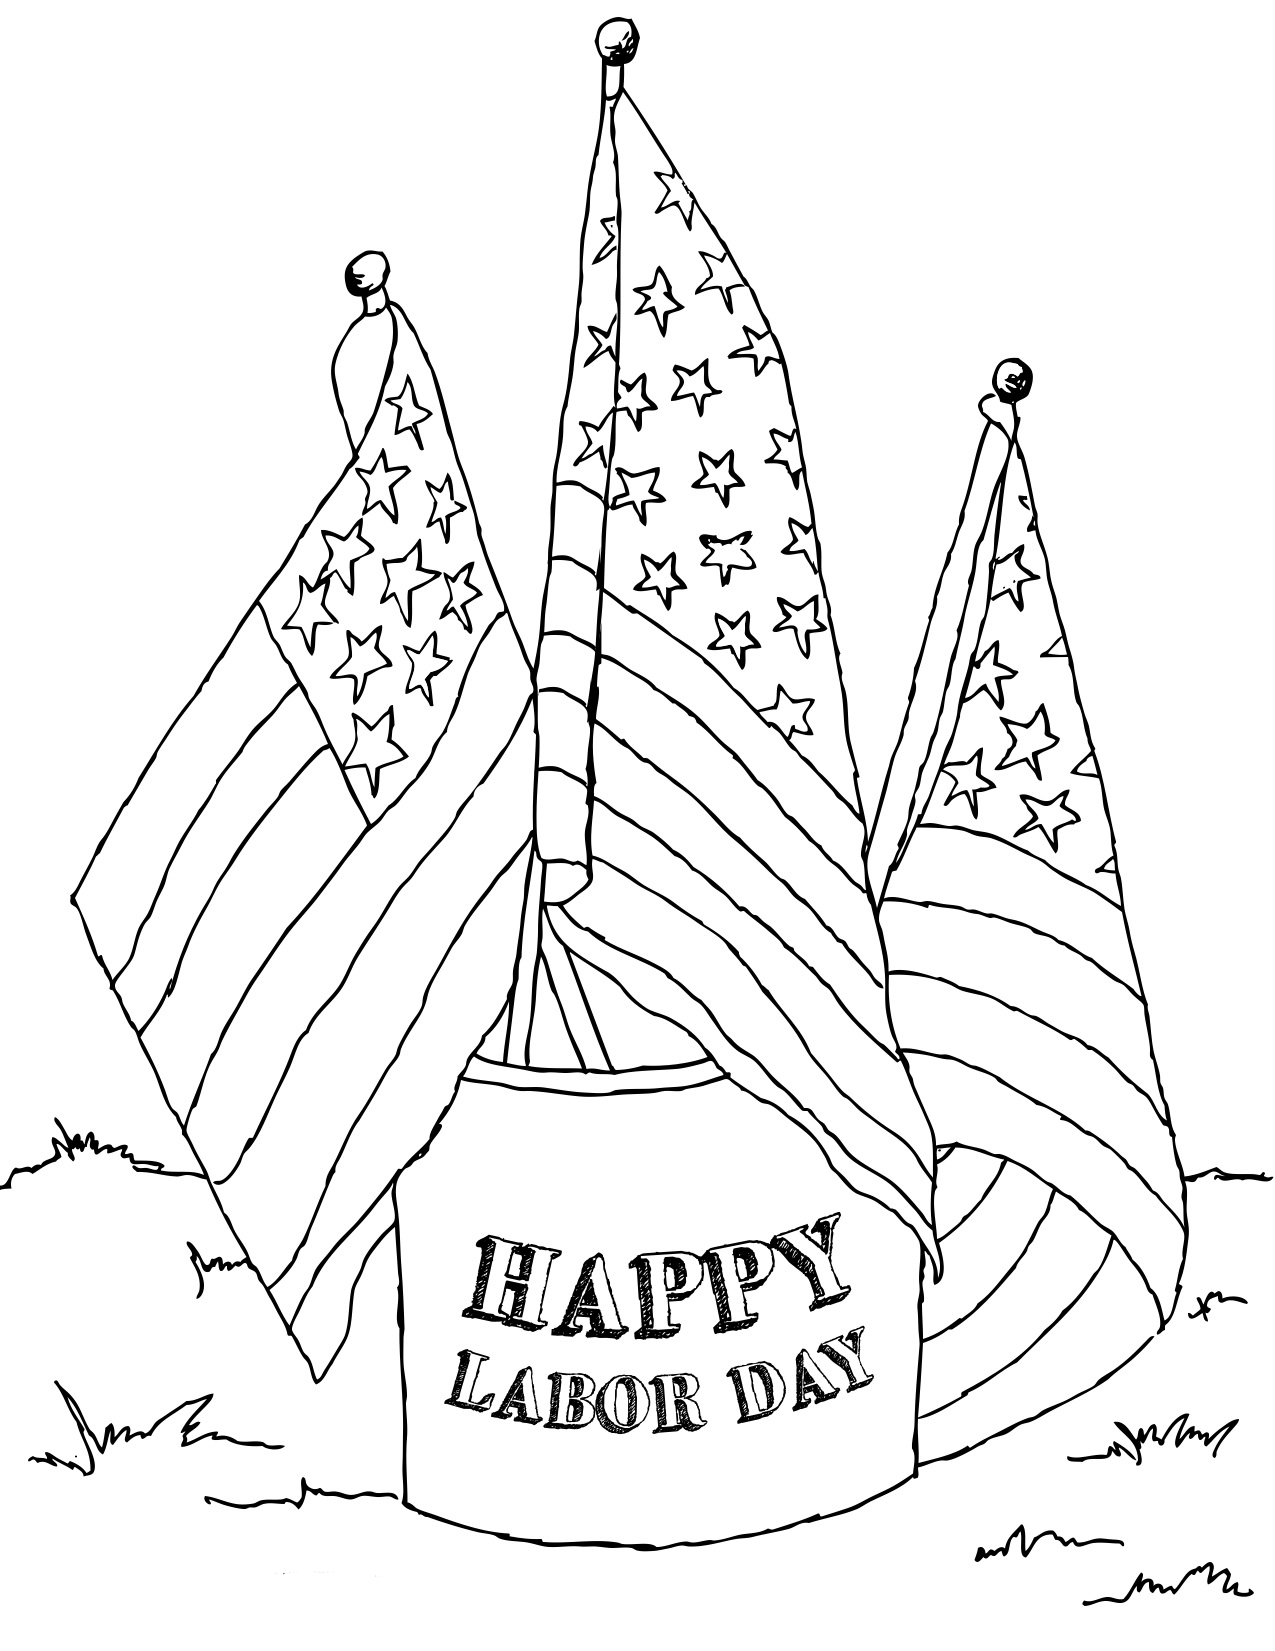 labor-day-coloring-pages-free-printable